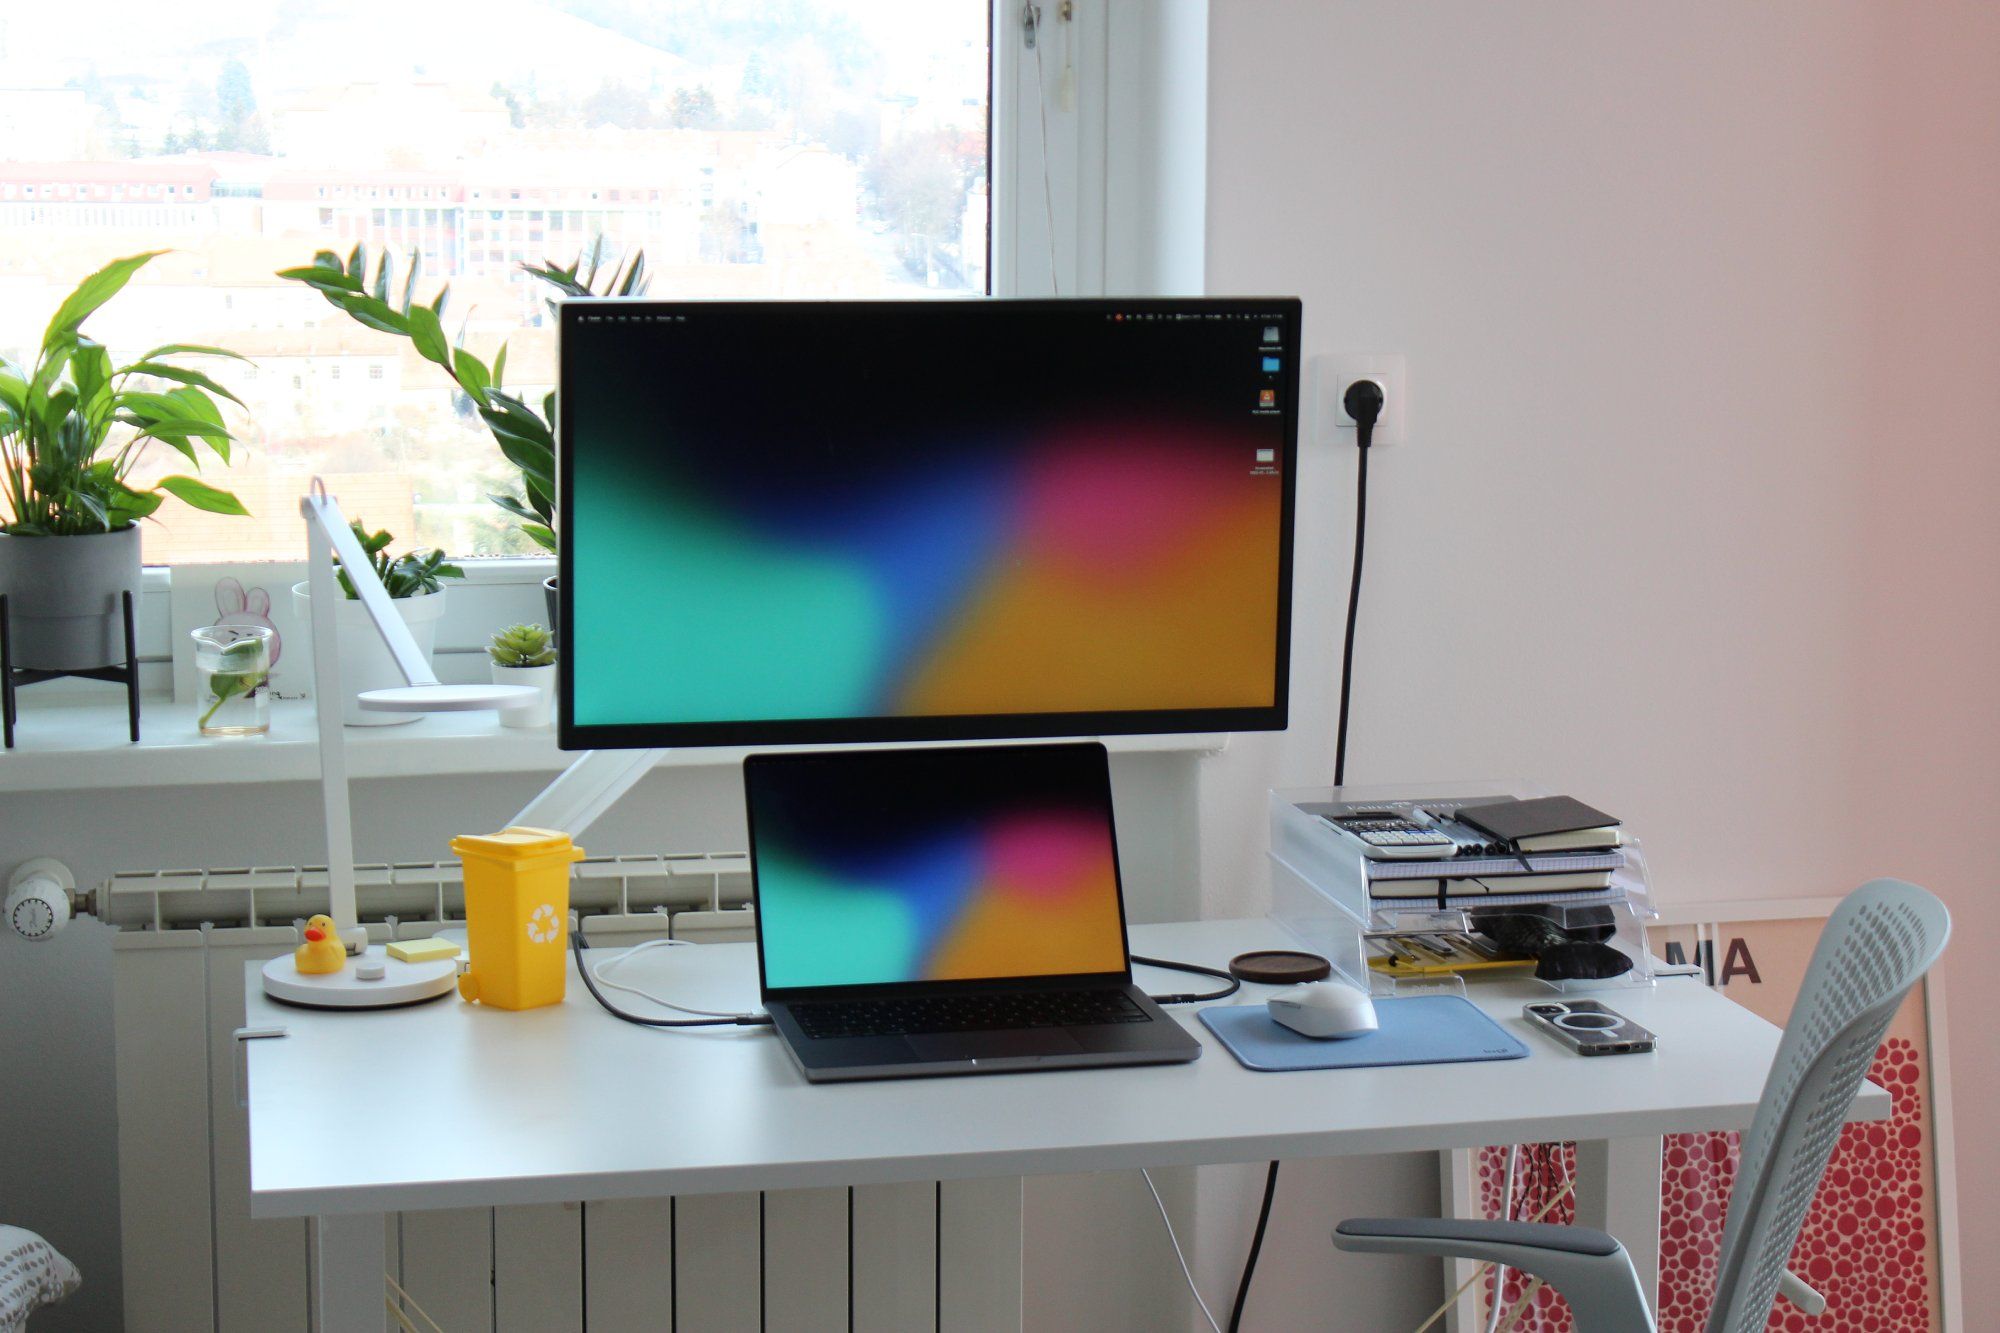 A home office setup featuring an IKEA TROTTEN sit-stand desk, a 4K LG monitor, an Apple MacBook Pro, a desk lamp, a mouse on the mat, books, notepads, and other accessories and peripherals